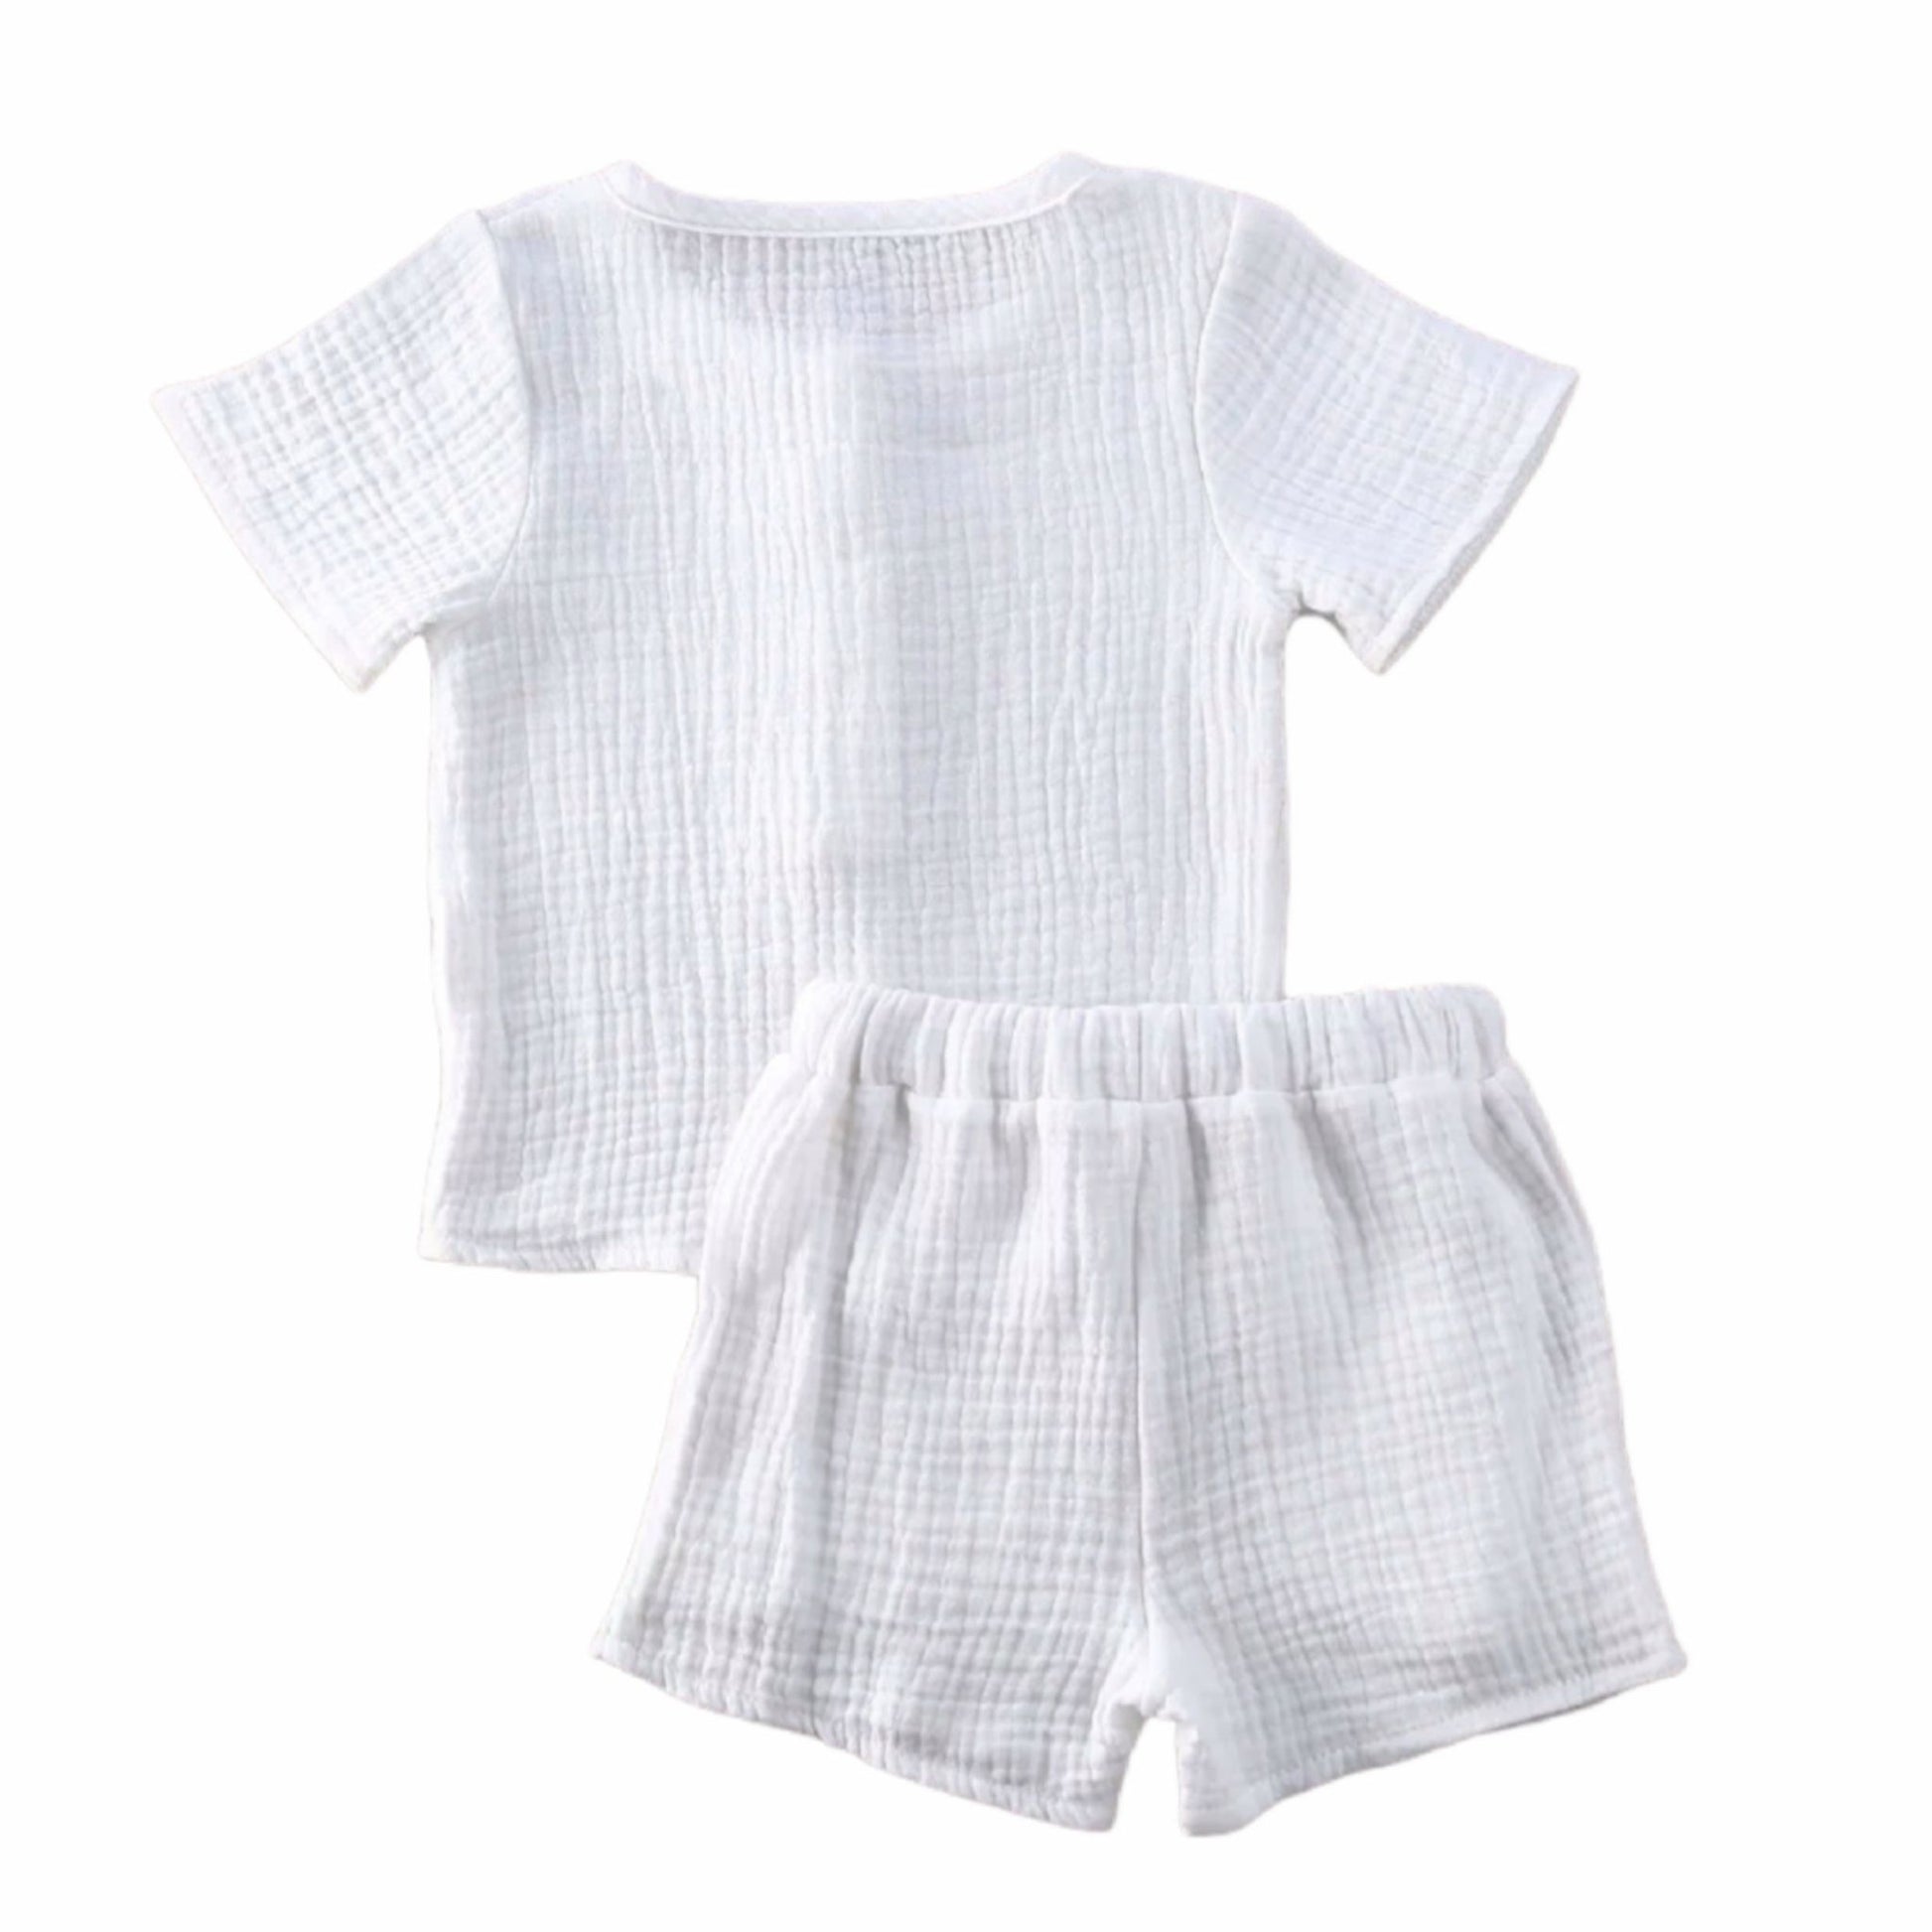 white summer set for babies and toddlers, two piece set with shirt and shorts, cotton | Hunny Bubba Kids 